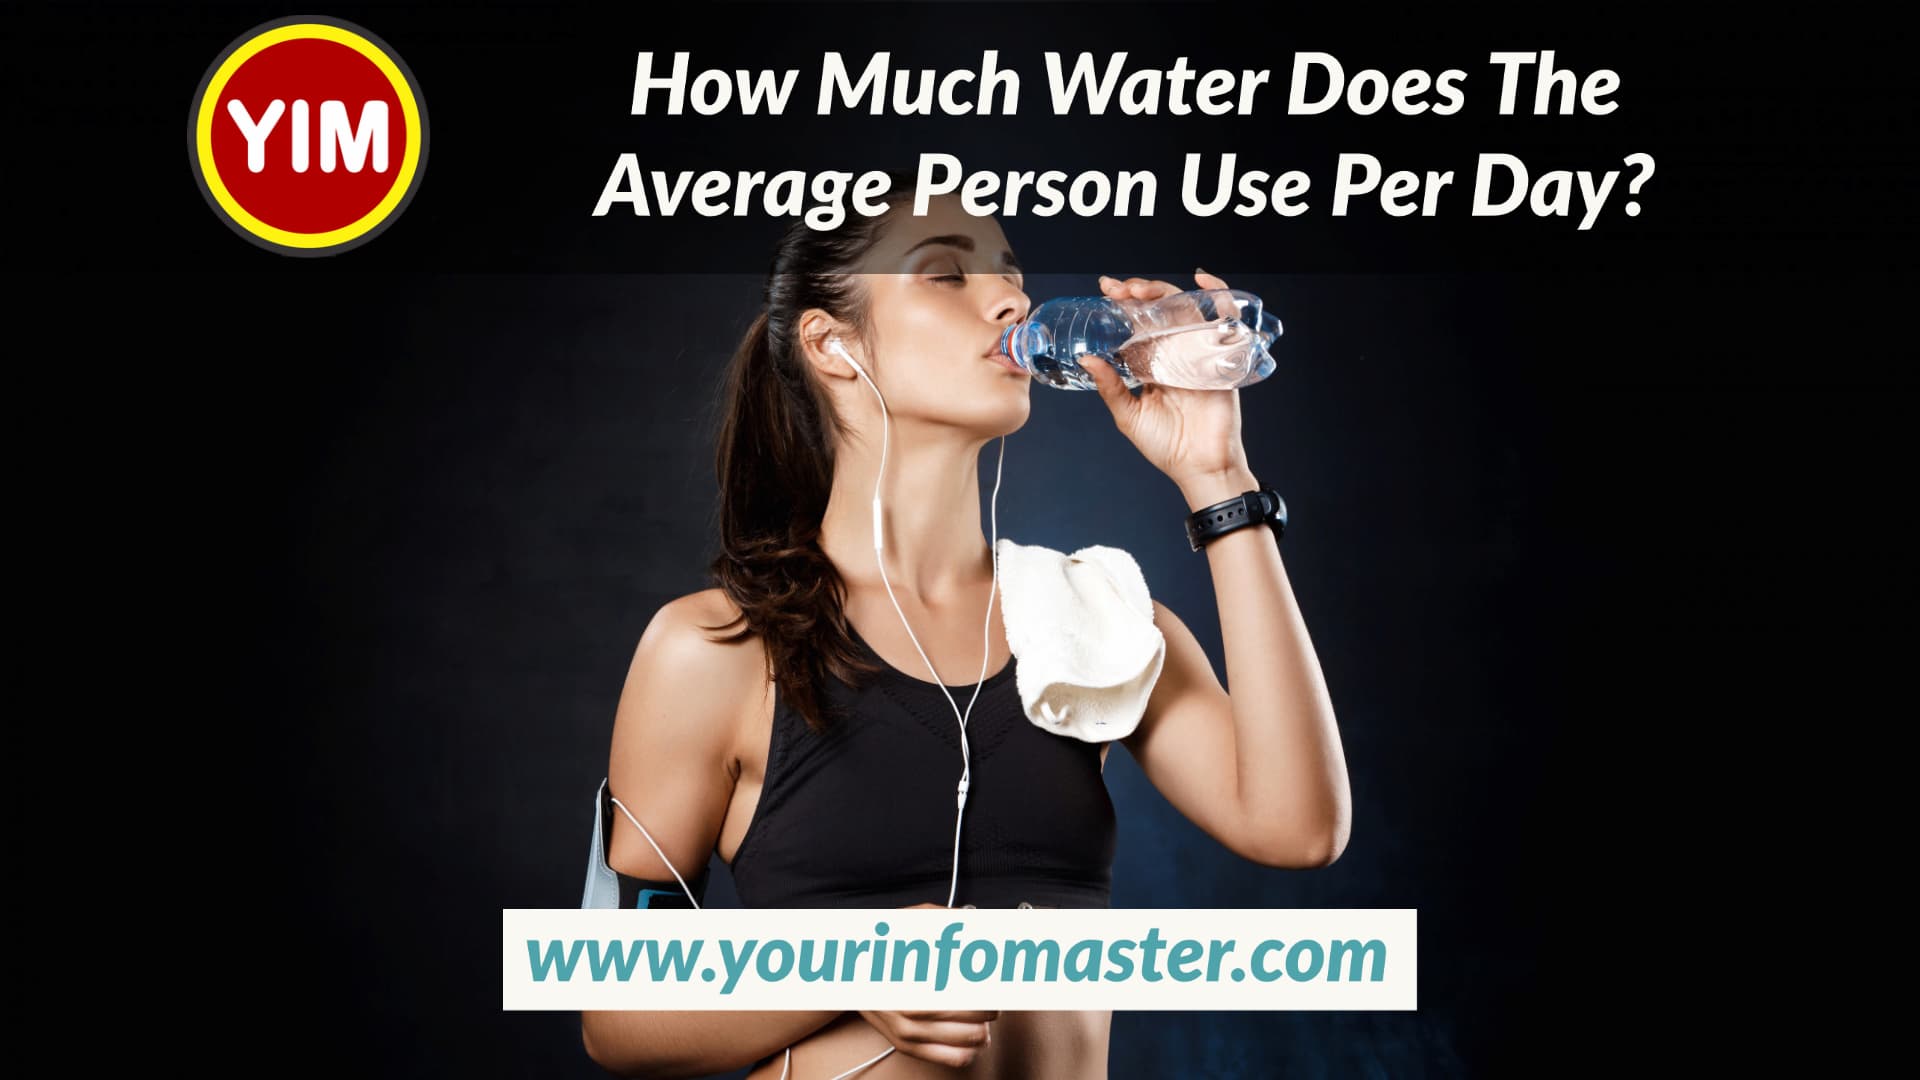 How much water do you need, How Much Water Does The Average Person Use Per Day, how much water should i drink a day, Polyphasic sleep, prime wellness, pure ohio wellness, restore hyper wellness, sleep and wellness centers, surterra wellness, theory wellness, ultimate guide, us wellness meats, wellness elements, xpress wellness